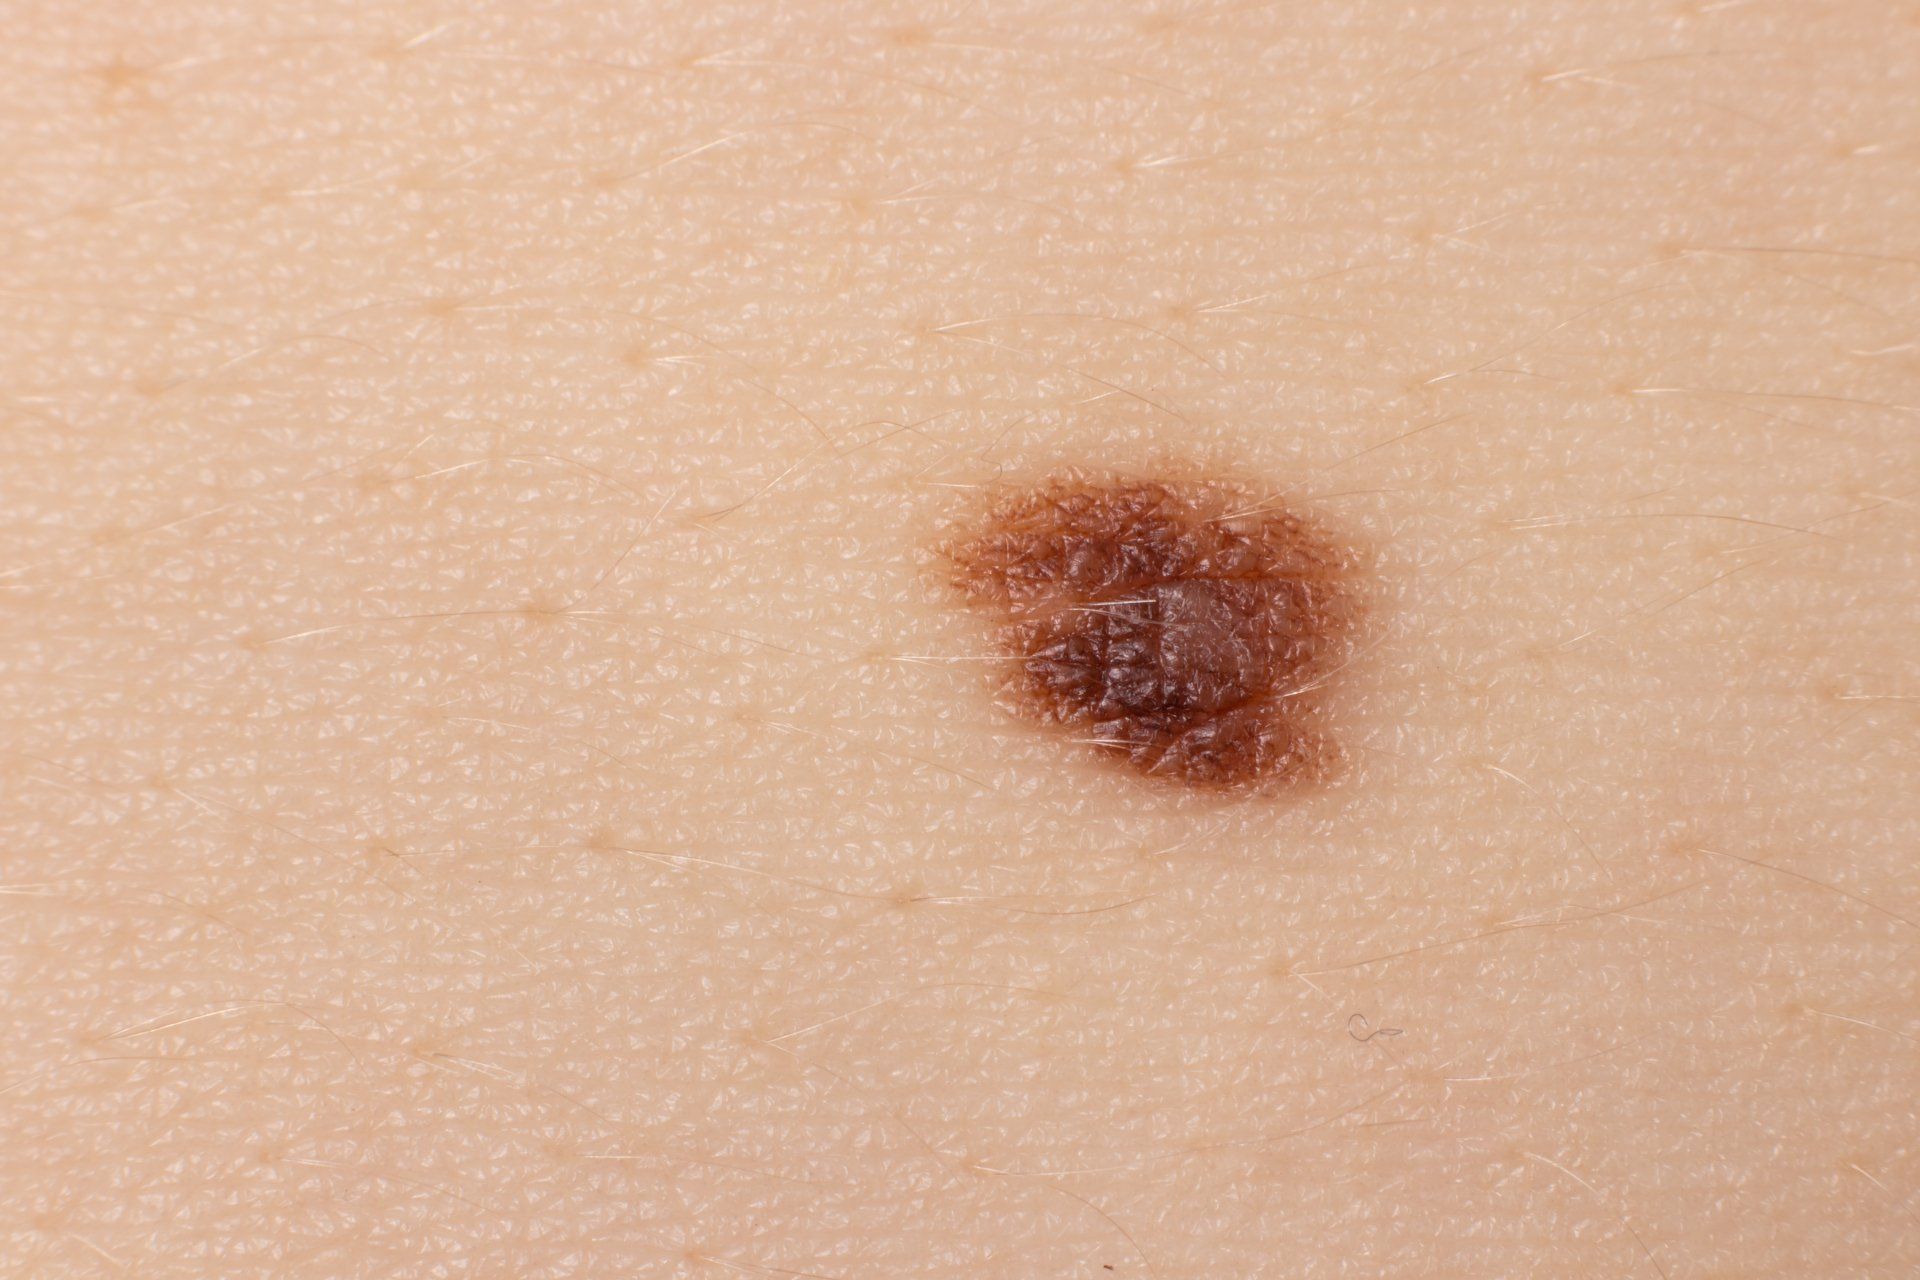 Image of a Mole, Zoomed-In on Caucasian Skin